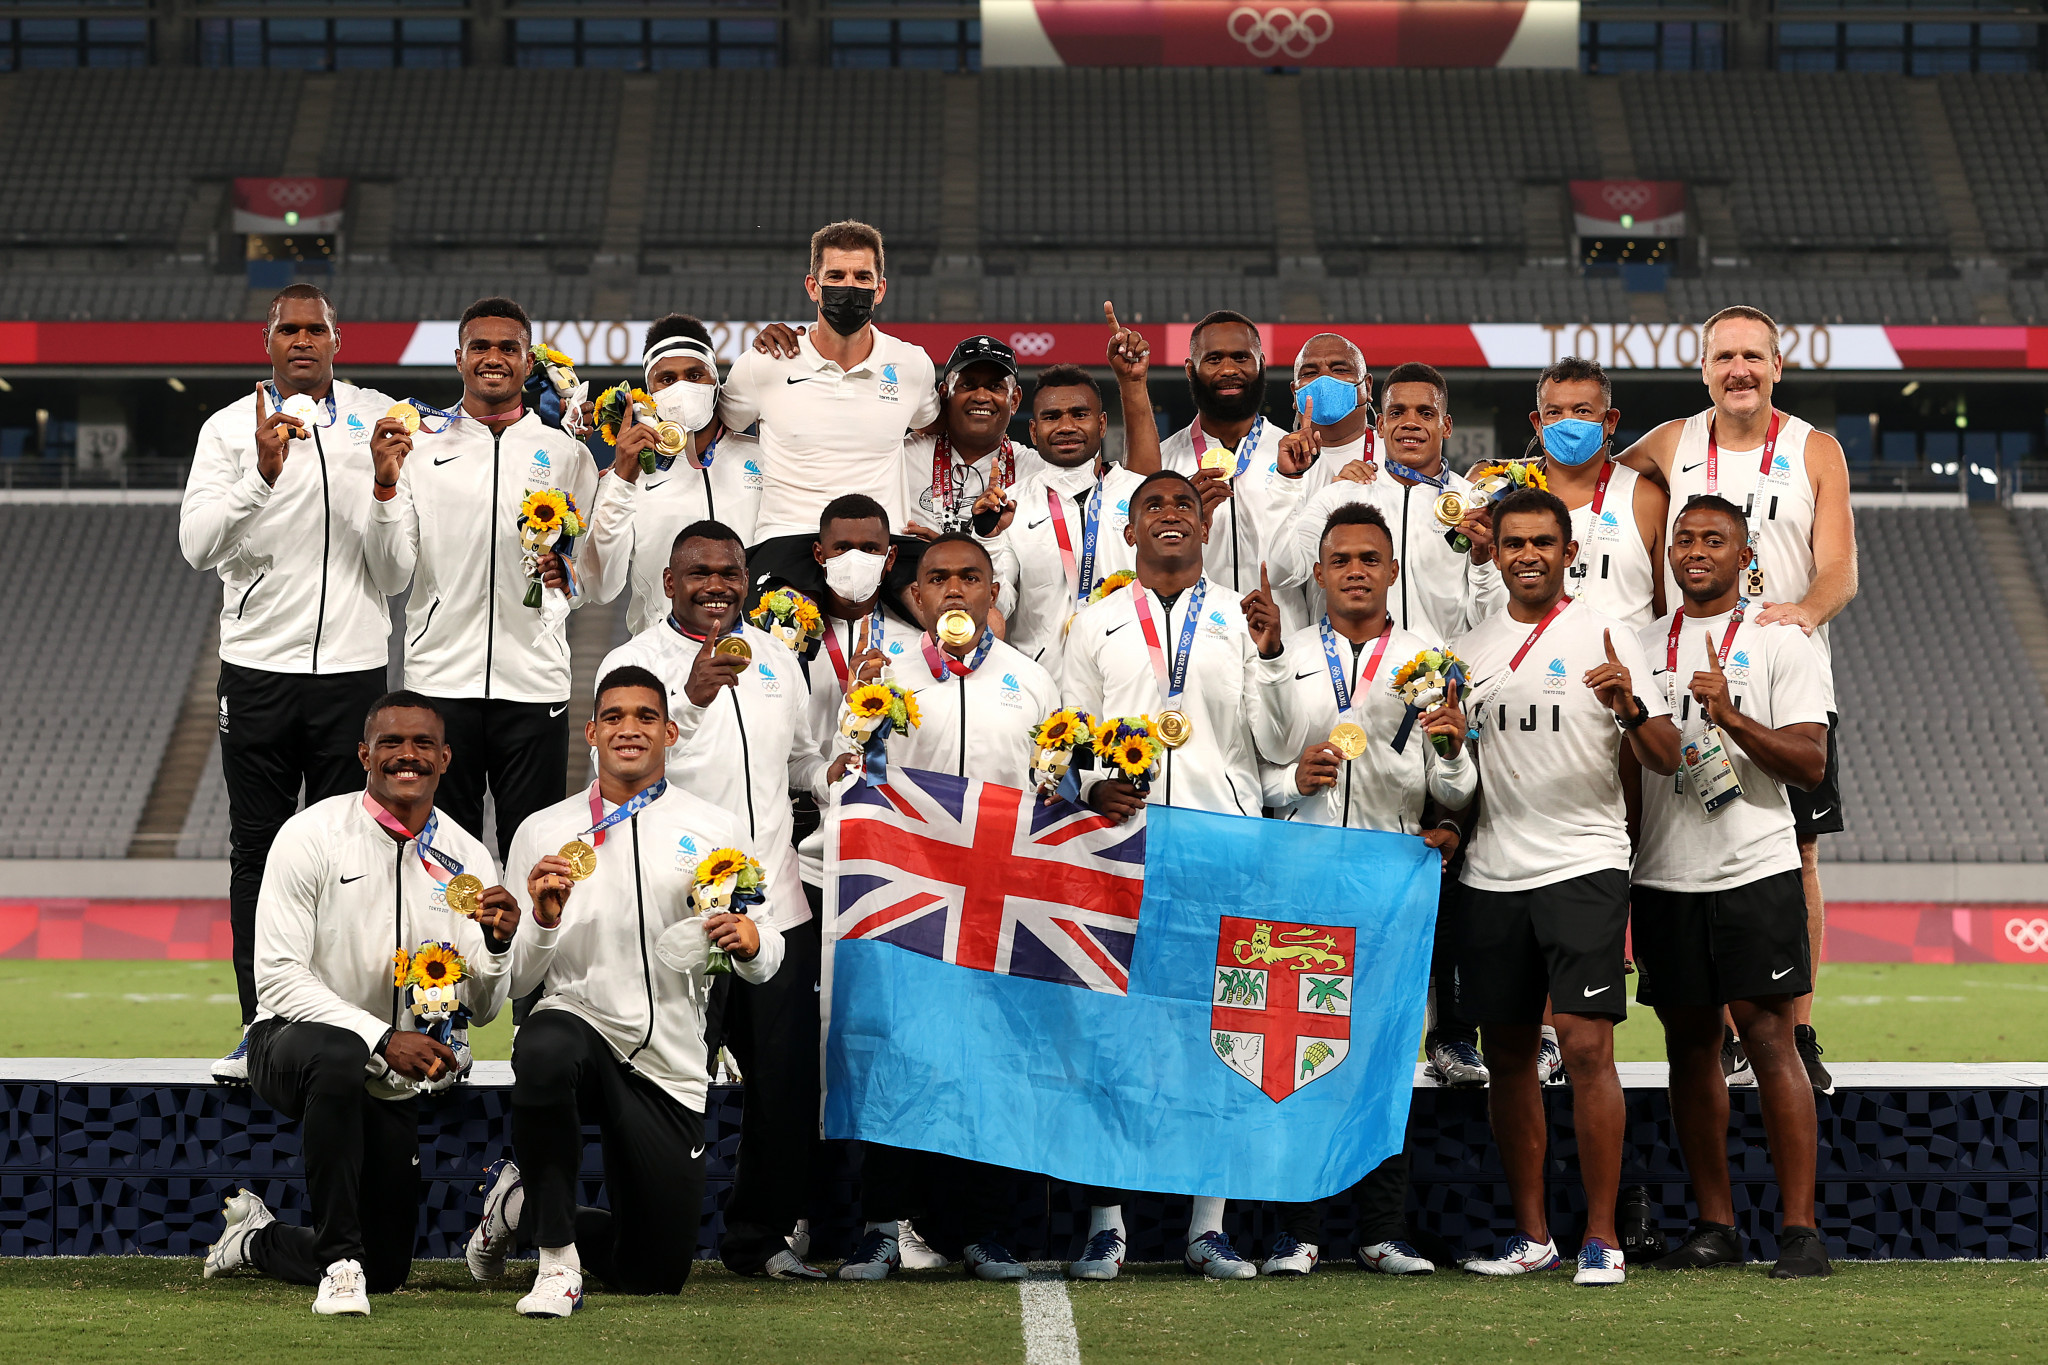 The Fiji Sports Awards are set to honour three years of achievement which includes Fiji's gold medal in rugby sevens at Tokyo 2020 ©Getty Images